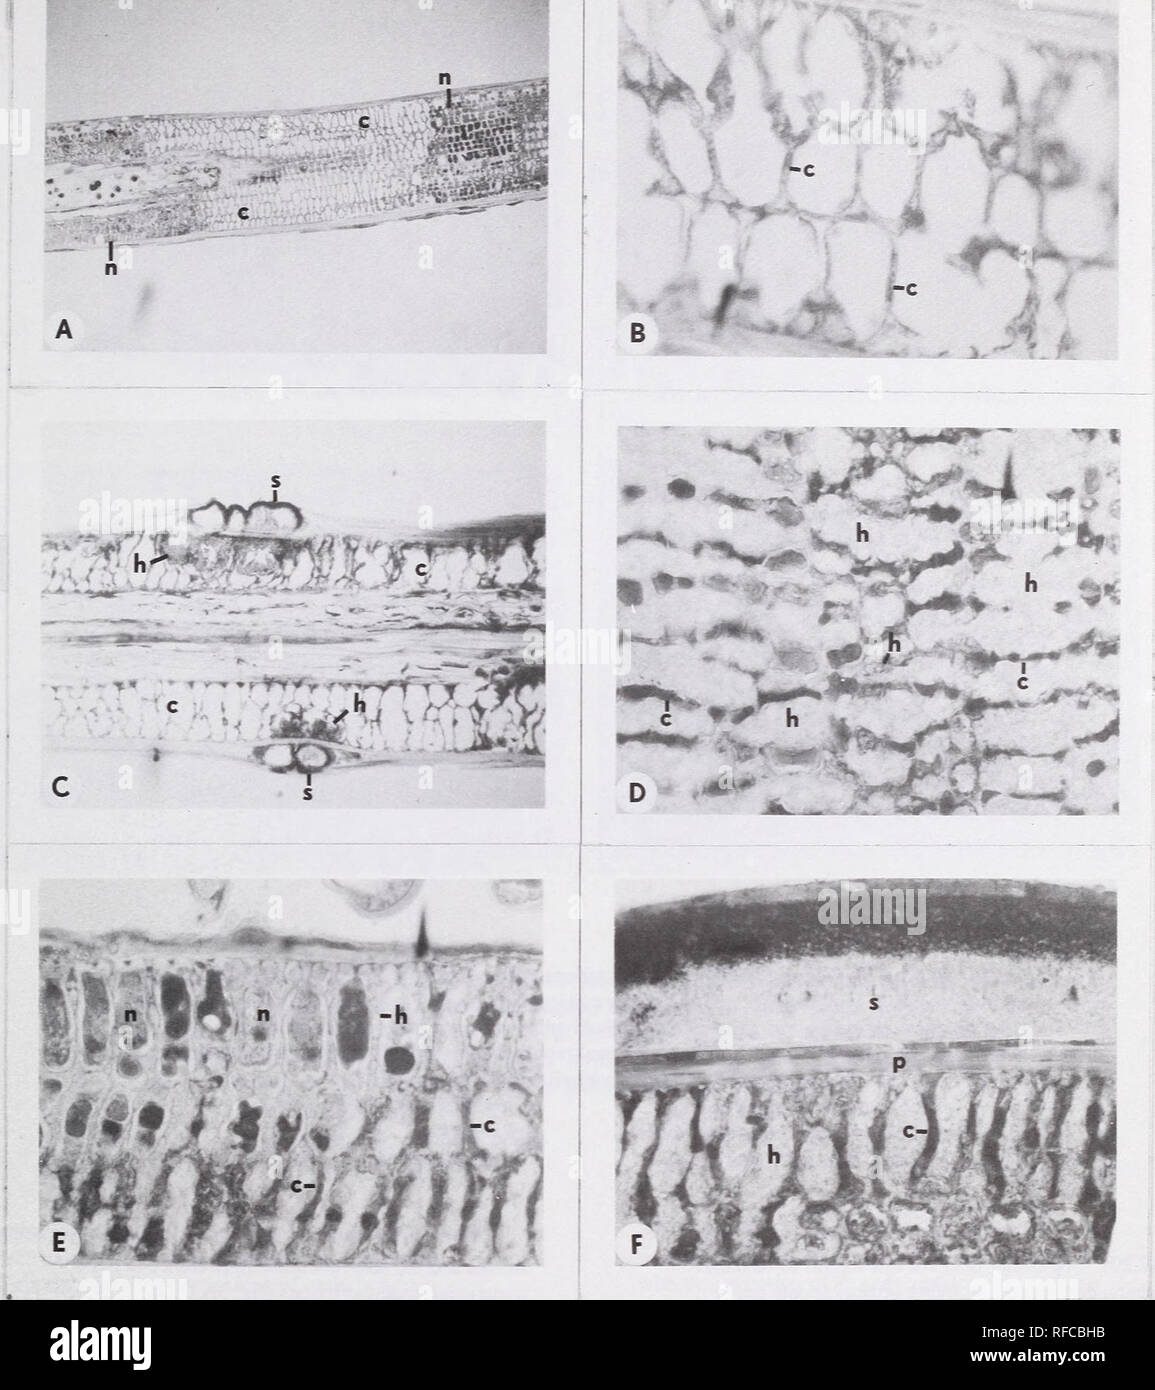 . Recent research on foliage diseases : conference proceedings : Carlisle, Pennsylvania, May 29-June 2, 1989. Leaves Diseases and pests United States Congresses. Figure 1.—A - C = Mycosphaerella dearnessii; D - F = Ploiodrema hedgcockii. All illustrations are from longitudinal sections. A) Section thru the mesophyll tissue. Note the noncollapsed and collapsed mesophyll cells, and the rather sharp separation of the two tissue types (X40); B) Col- lapsed mesophyll area exhibiting empty appearence due to lack of hyphae (X40); C) Stroma-bearing tissue exhibiting concentration of hyphae beneath str Stock Photo